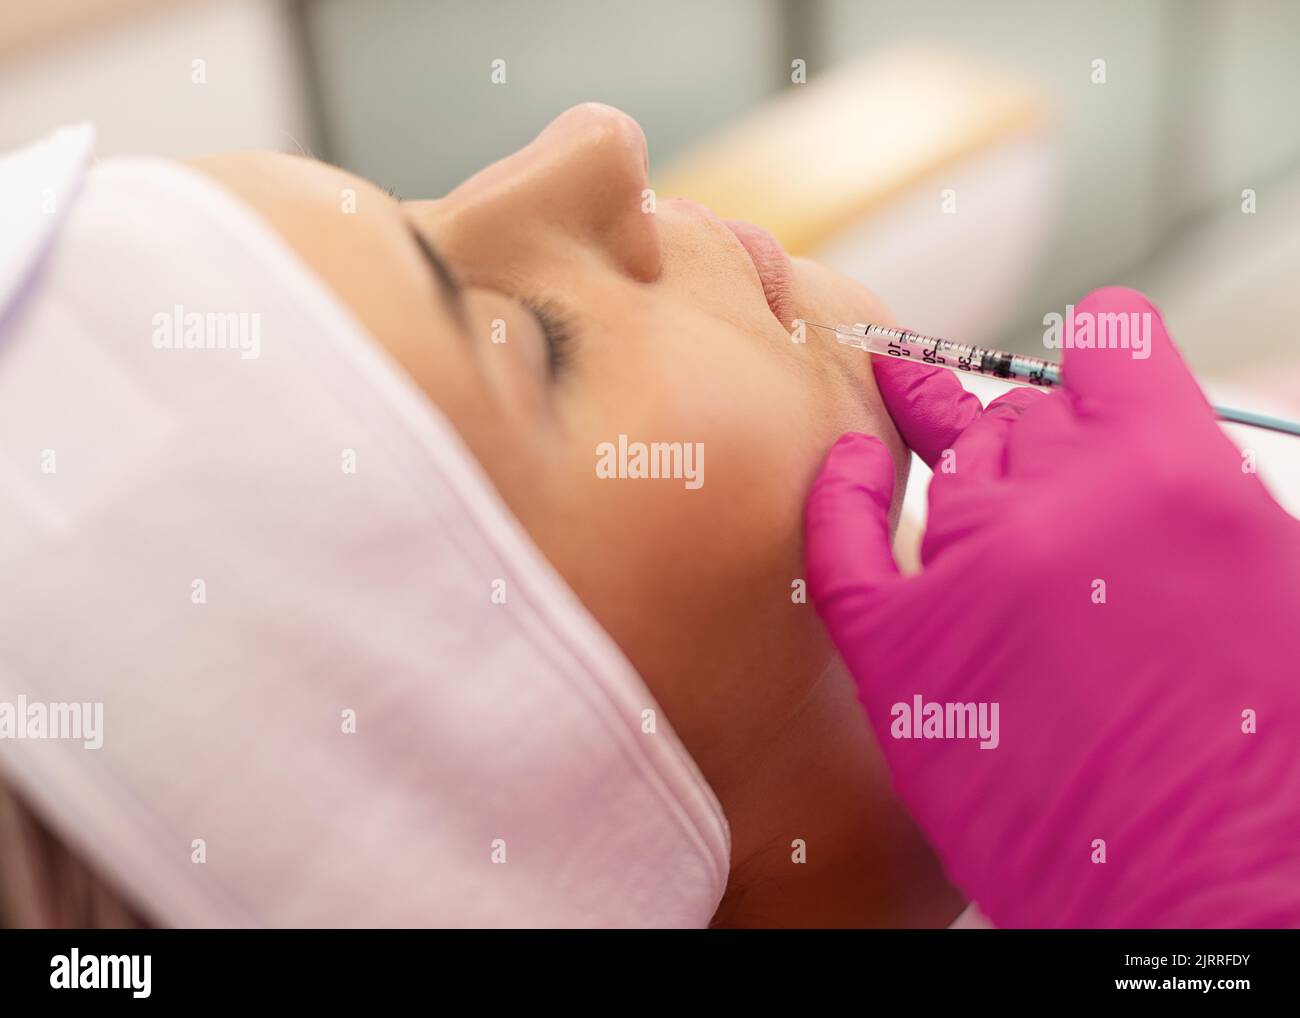 Side view of young woman getting beauty collagen injection. Cosmetologist making anti-wrinkle procedure in pink gloves. Stock Photo